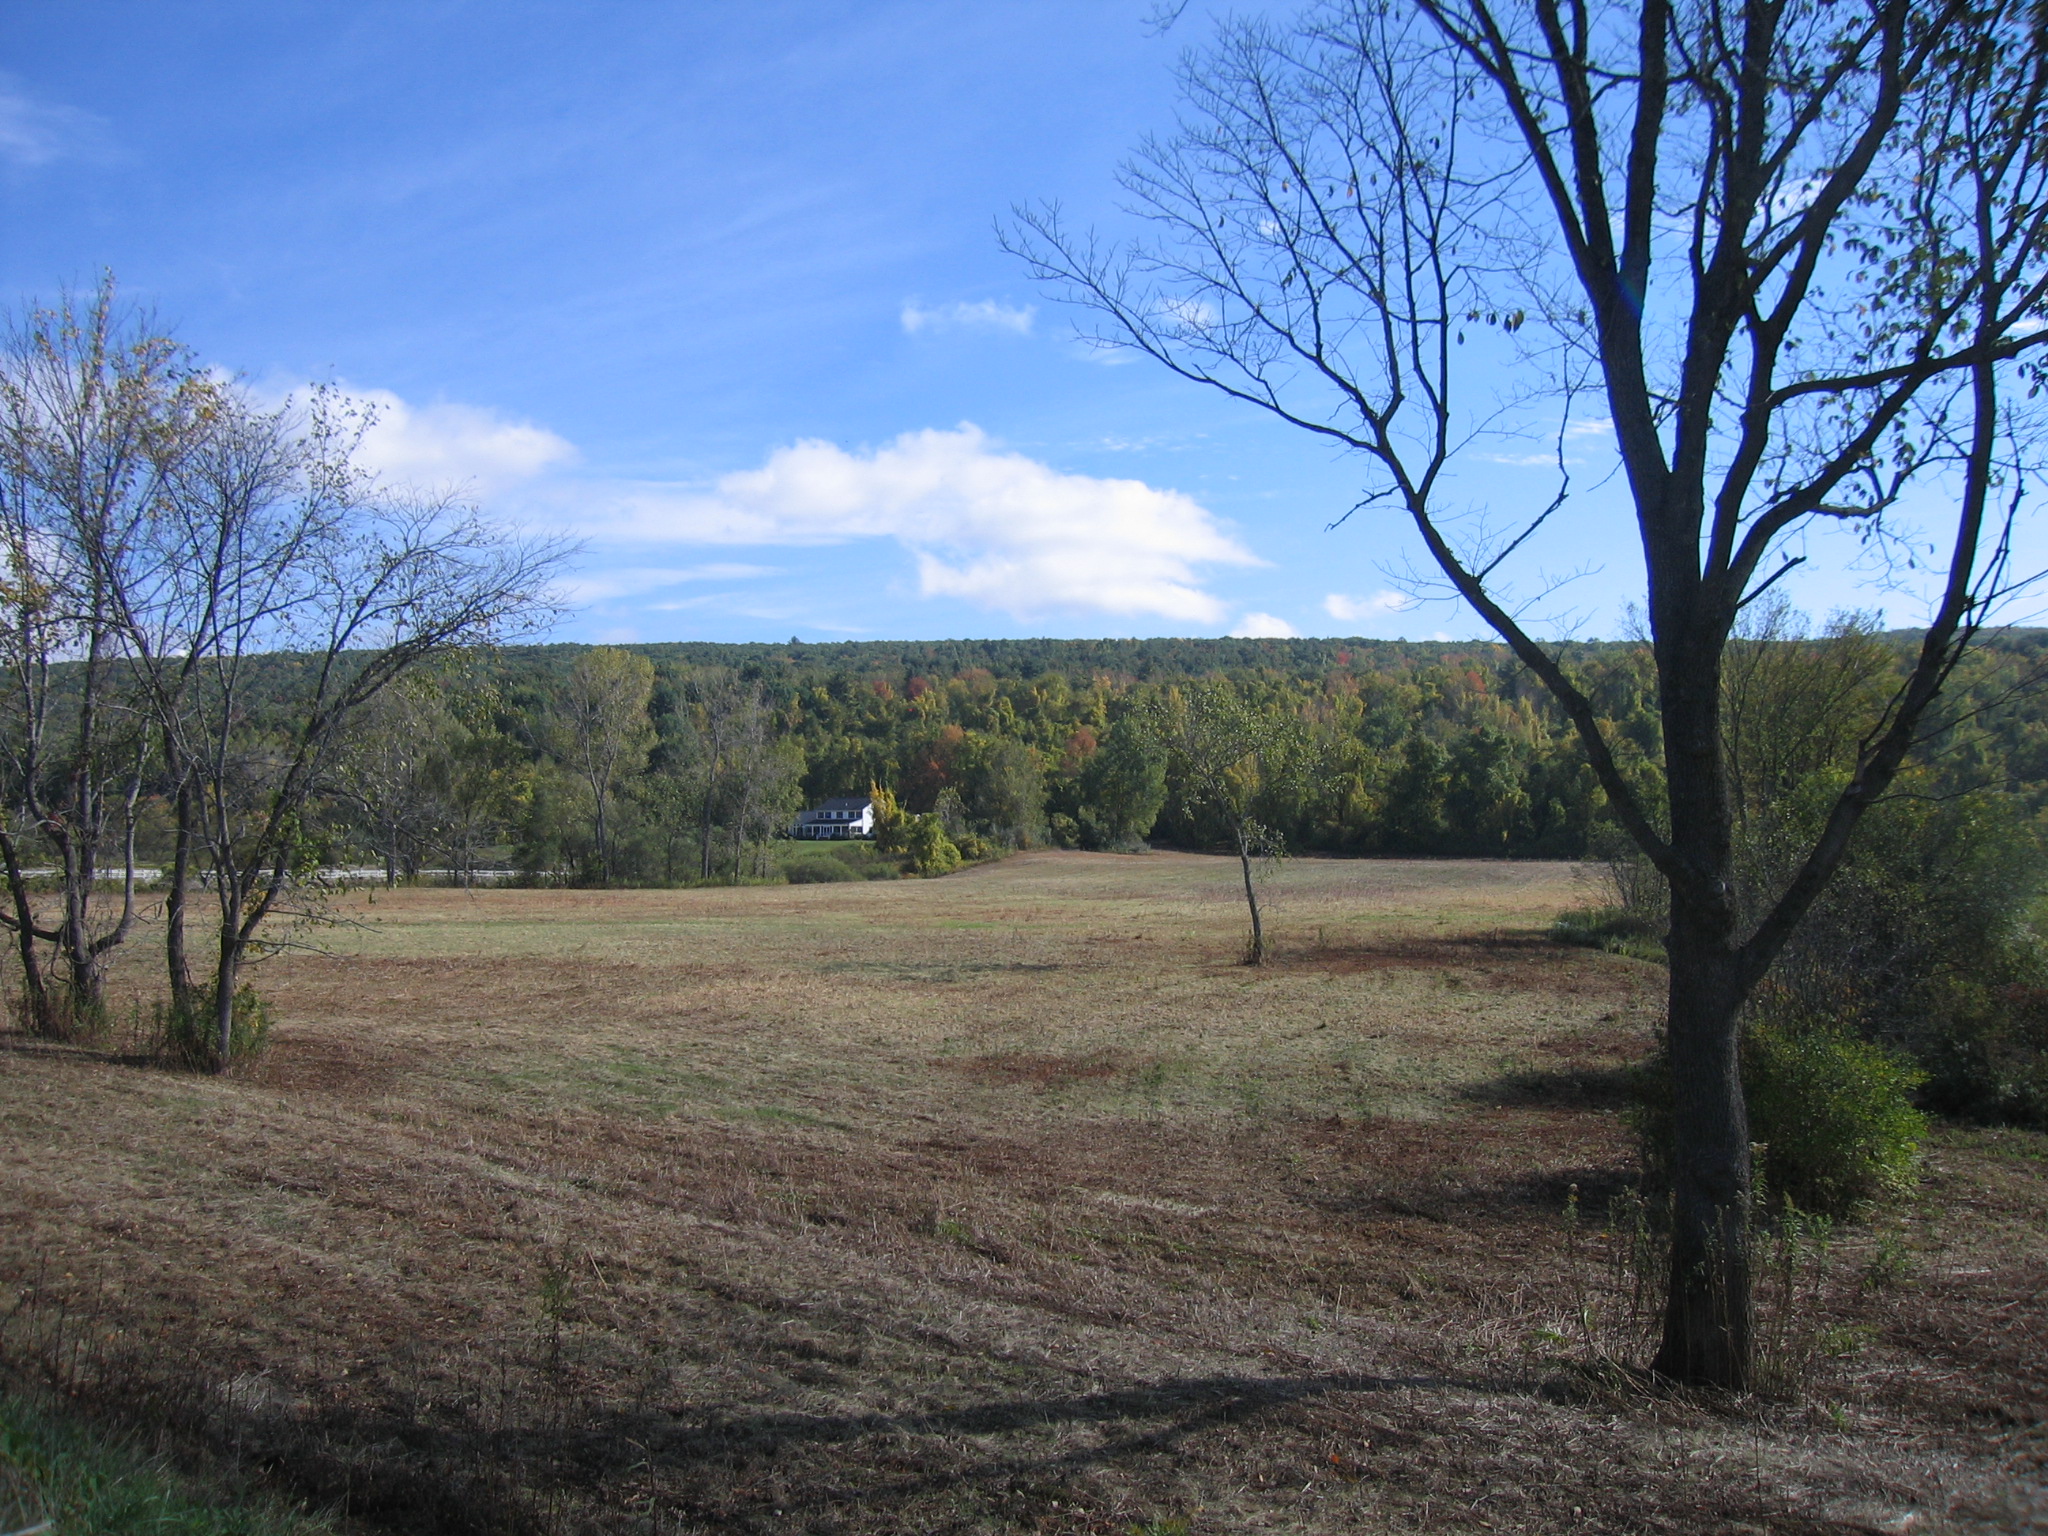 Ladd Property is donated to Great Barrington Land Conservancy 